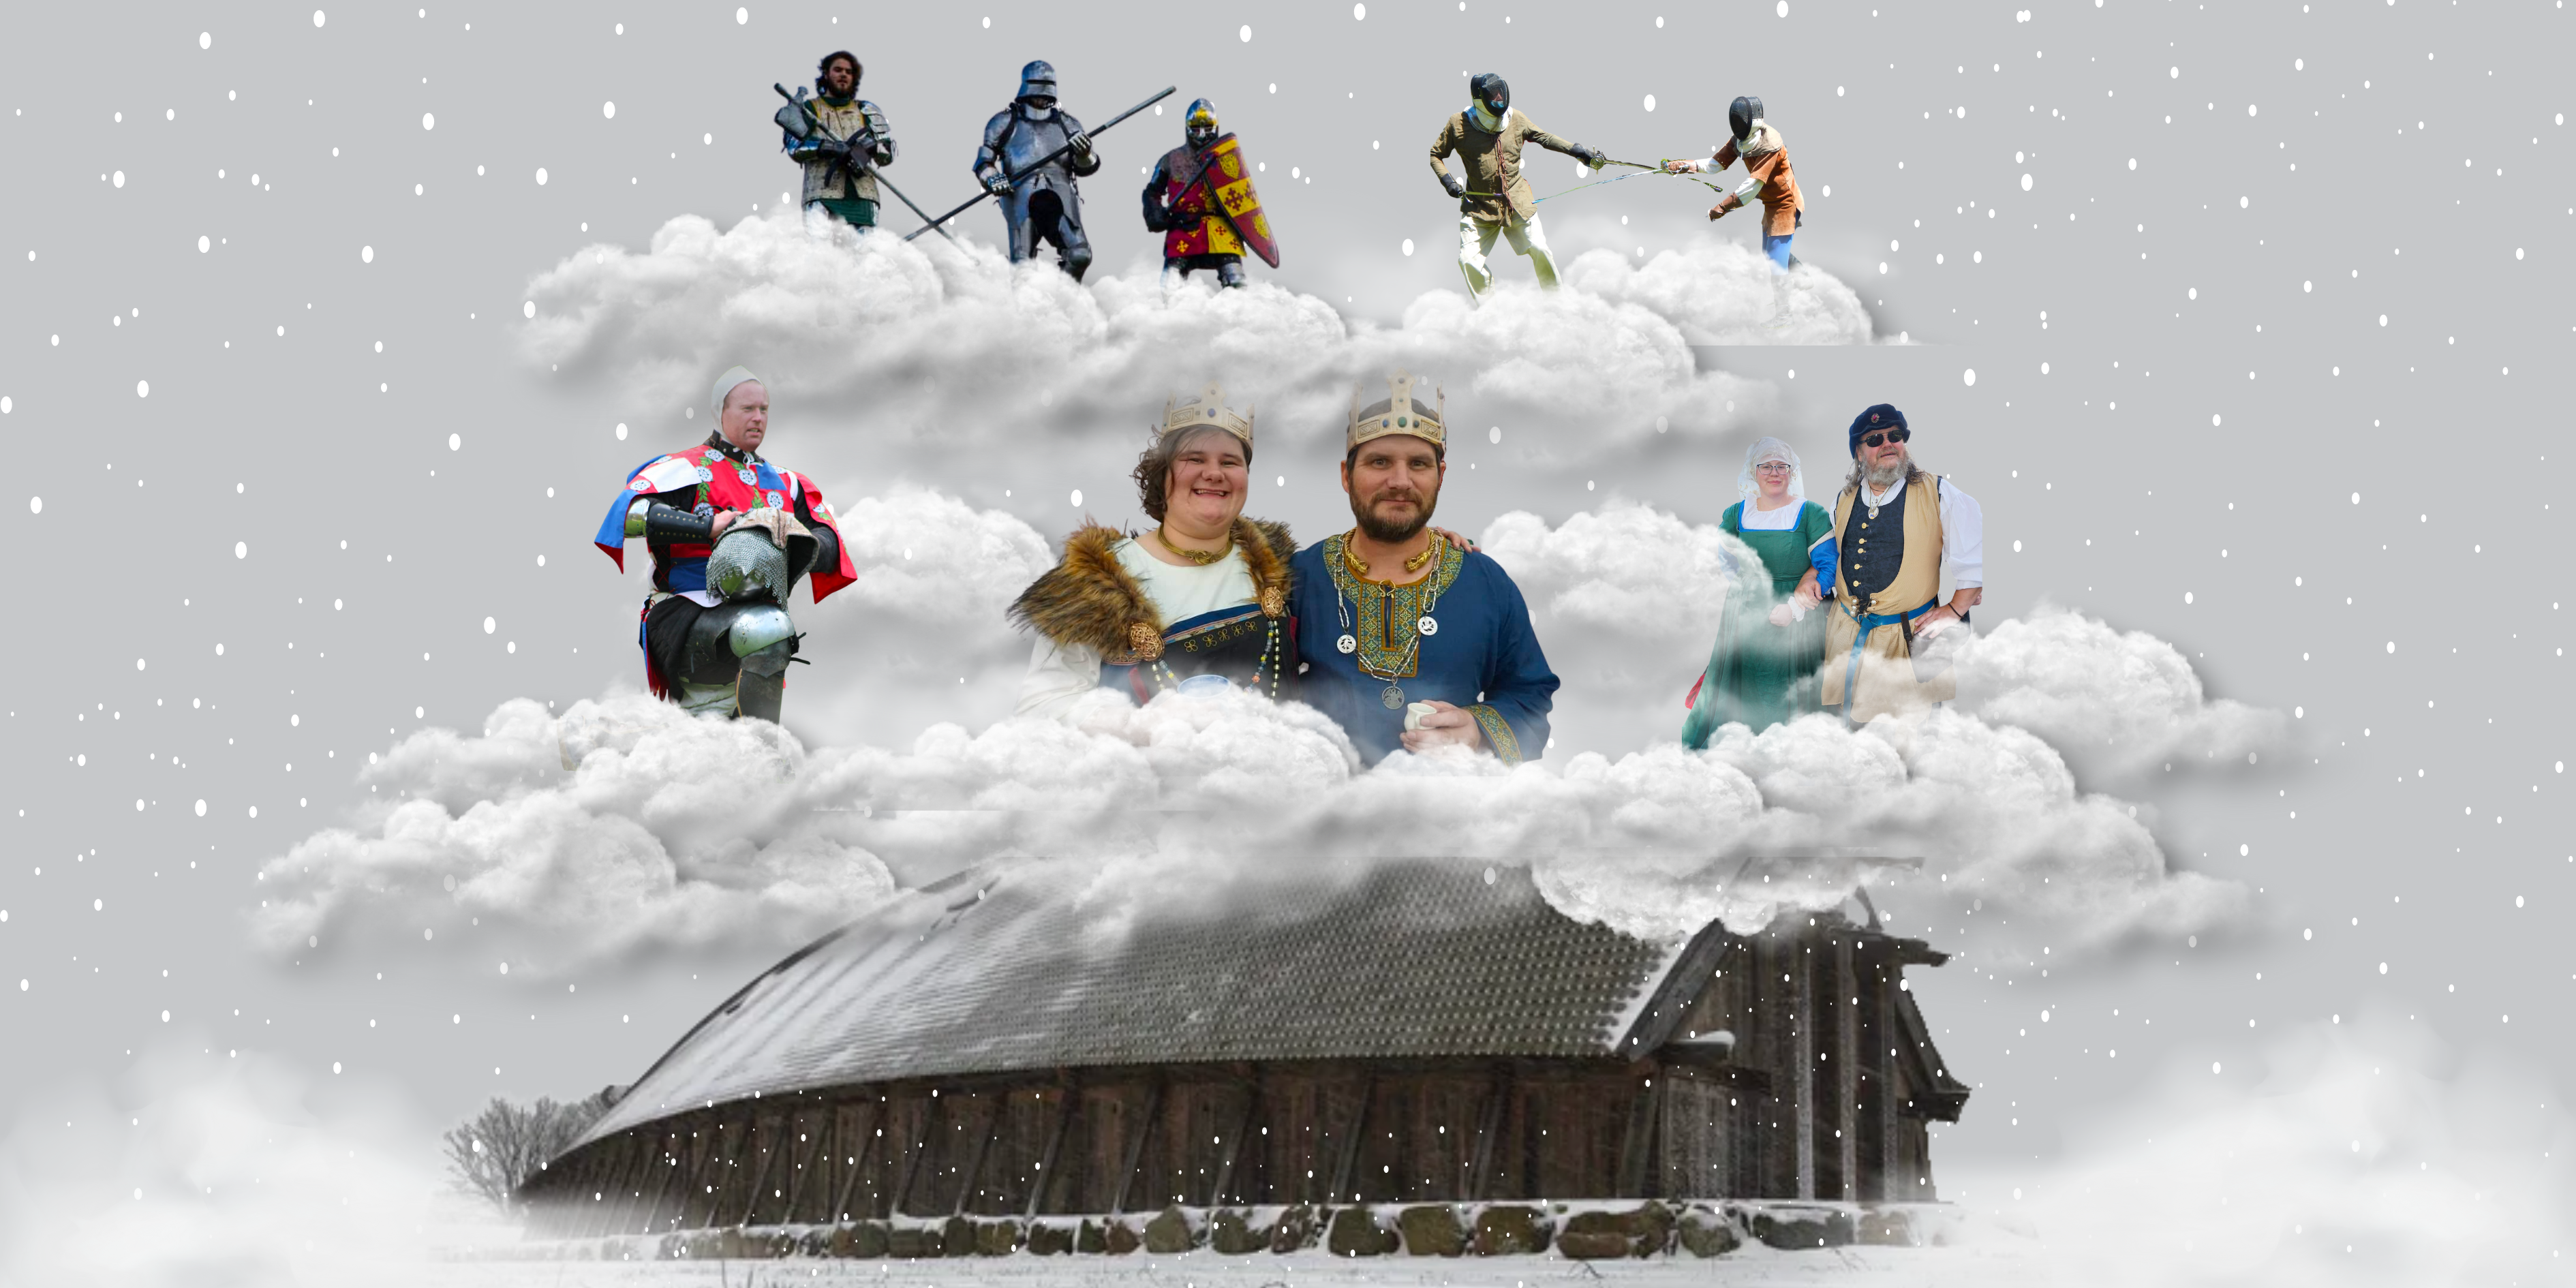 landscape wintersouth 2023 poster - mead hall in the snow with key baronial members in the clouds overlooking the land